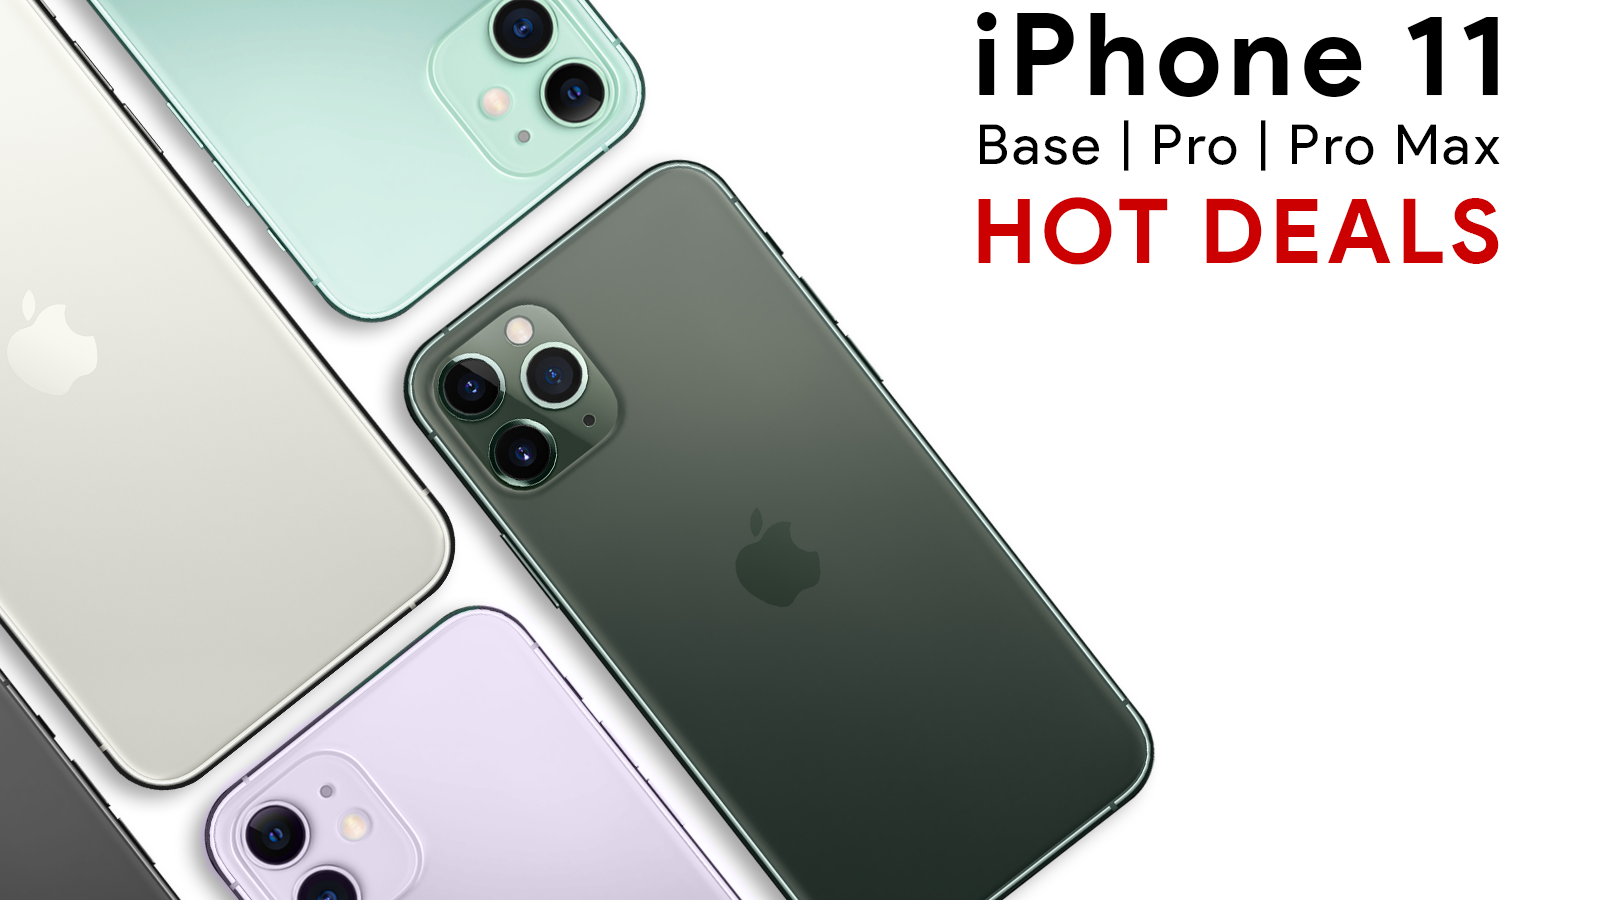 All iPhone 11, Pro and Max deals and availability at Verizon, TMobile